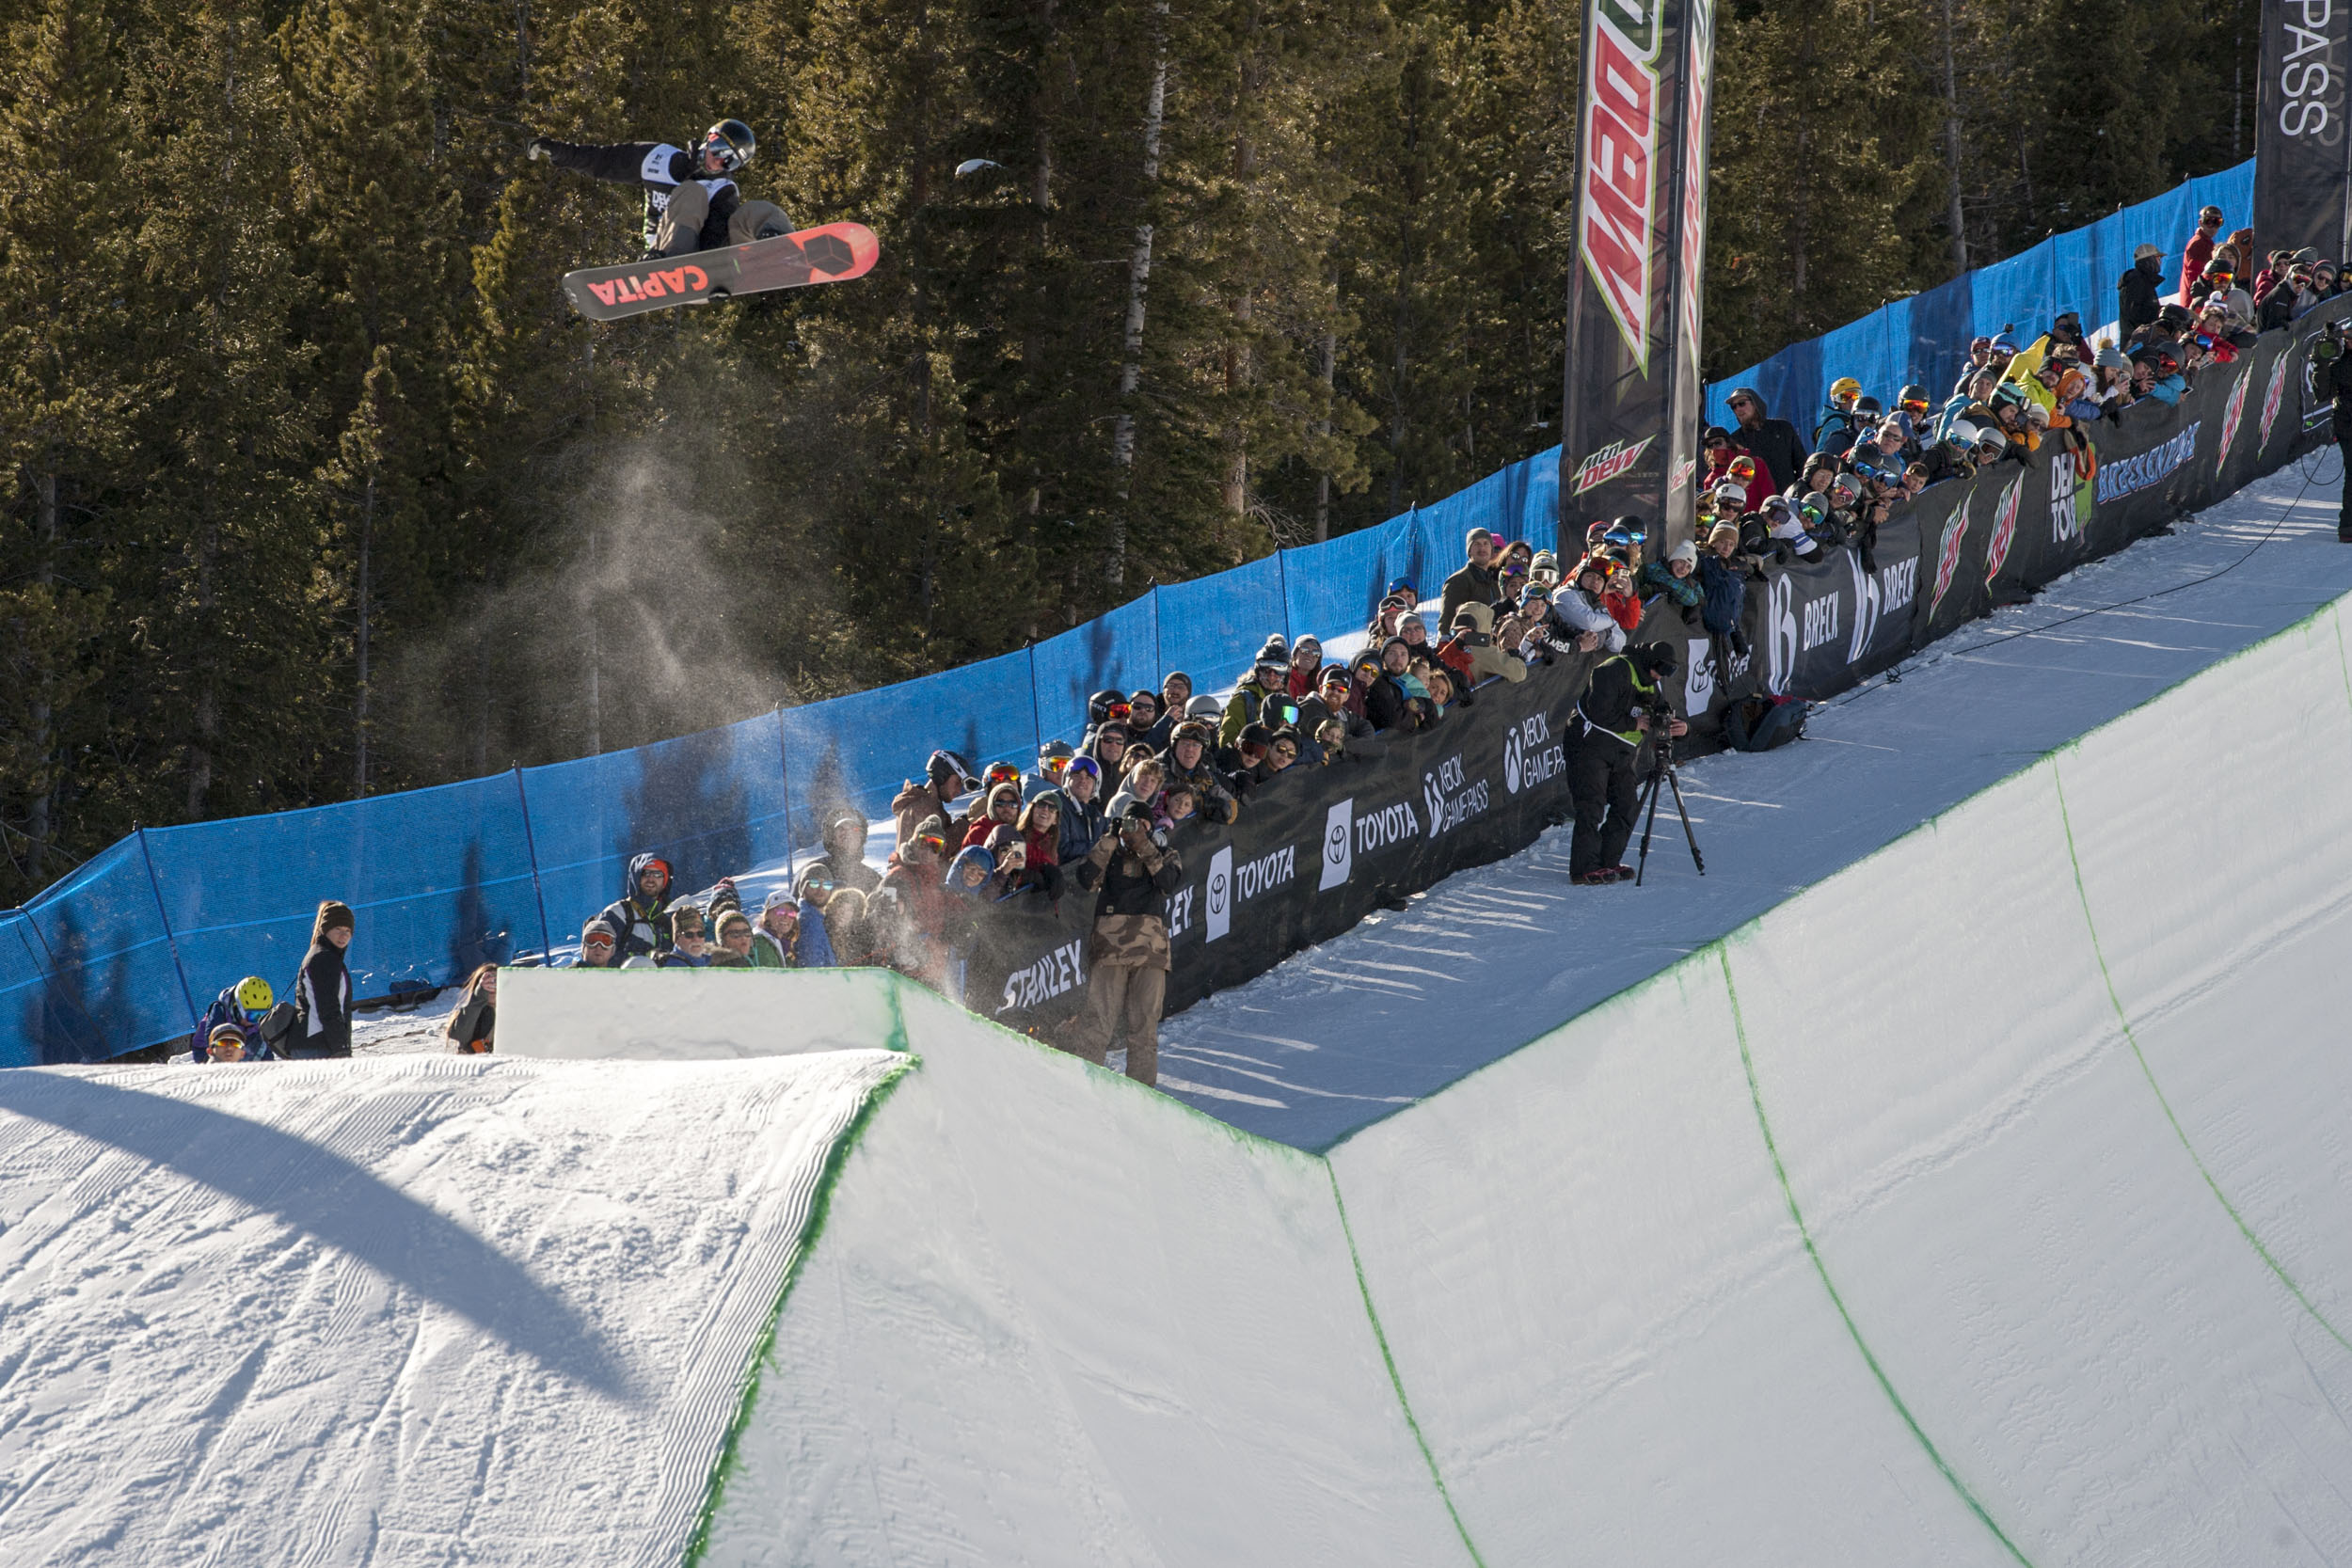 Chase_Josey_Modified_Pipe_Dew_Tour_Breck_Clavin13